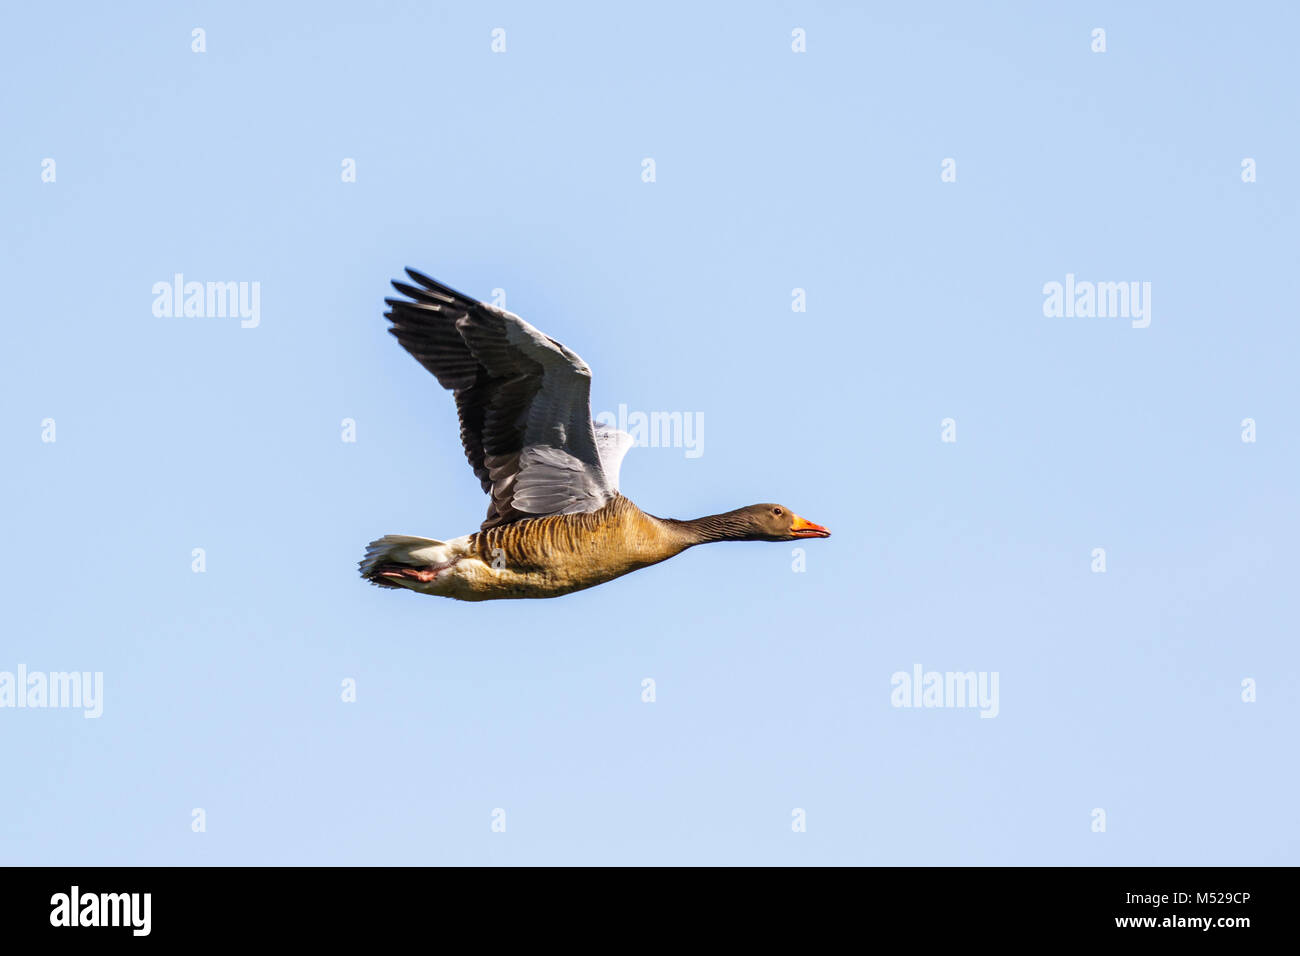 Alone Greylag Goose flying in a blue sky Stock Photo